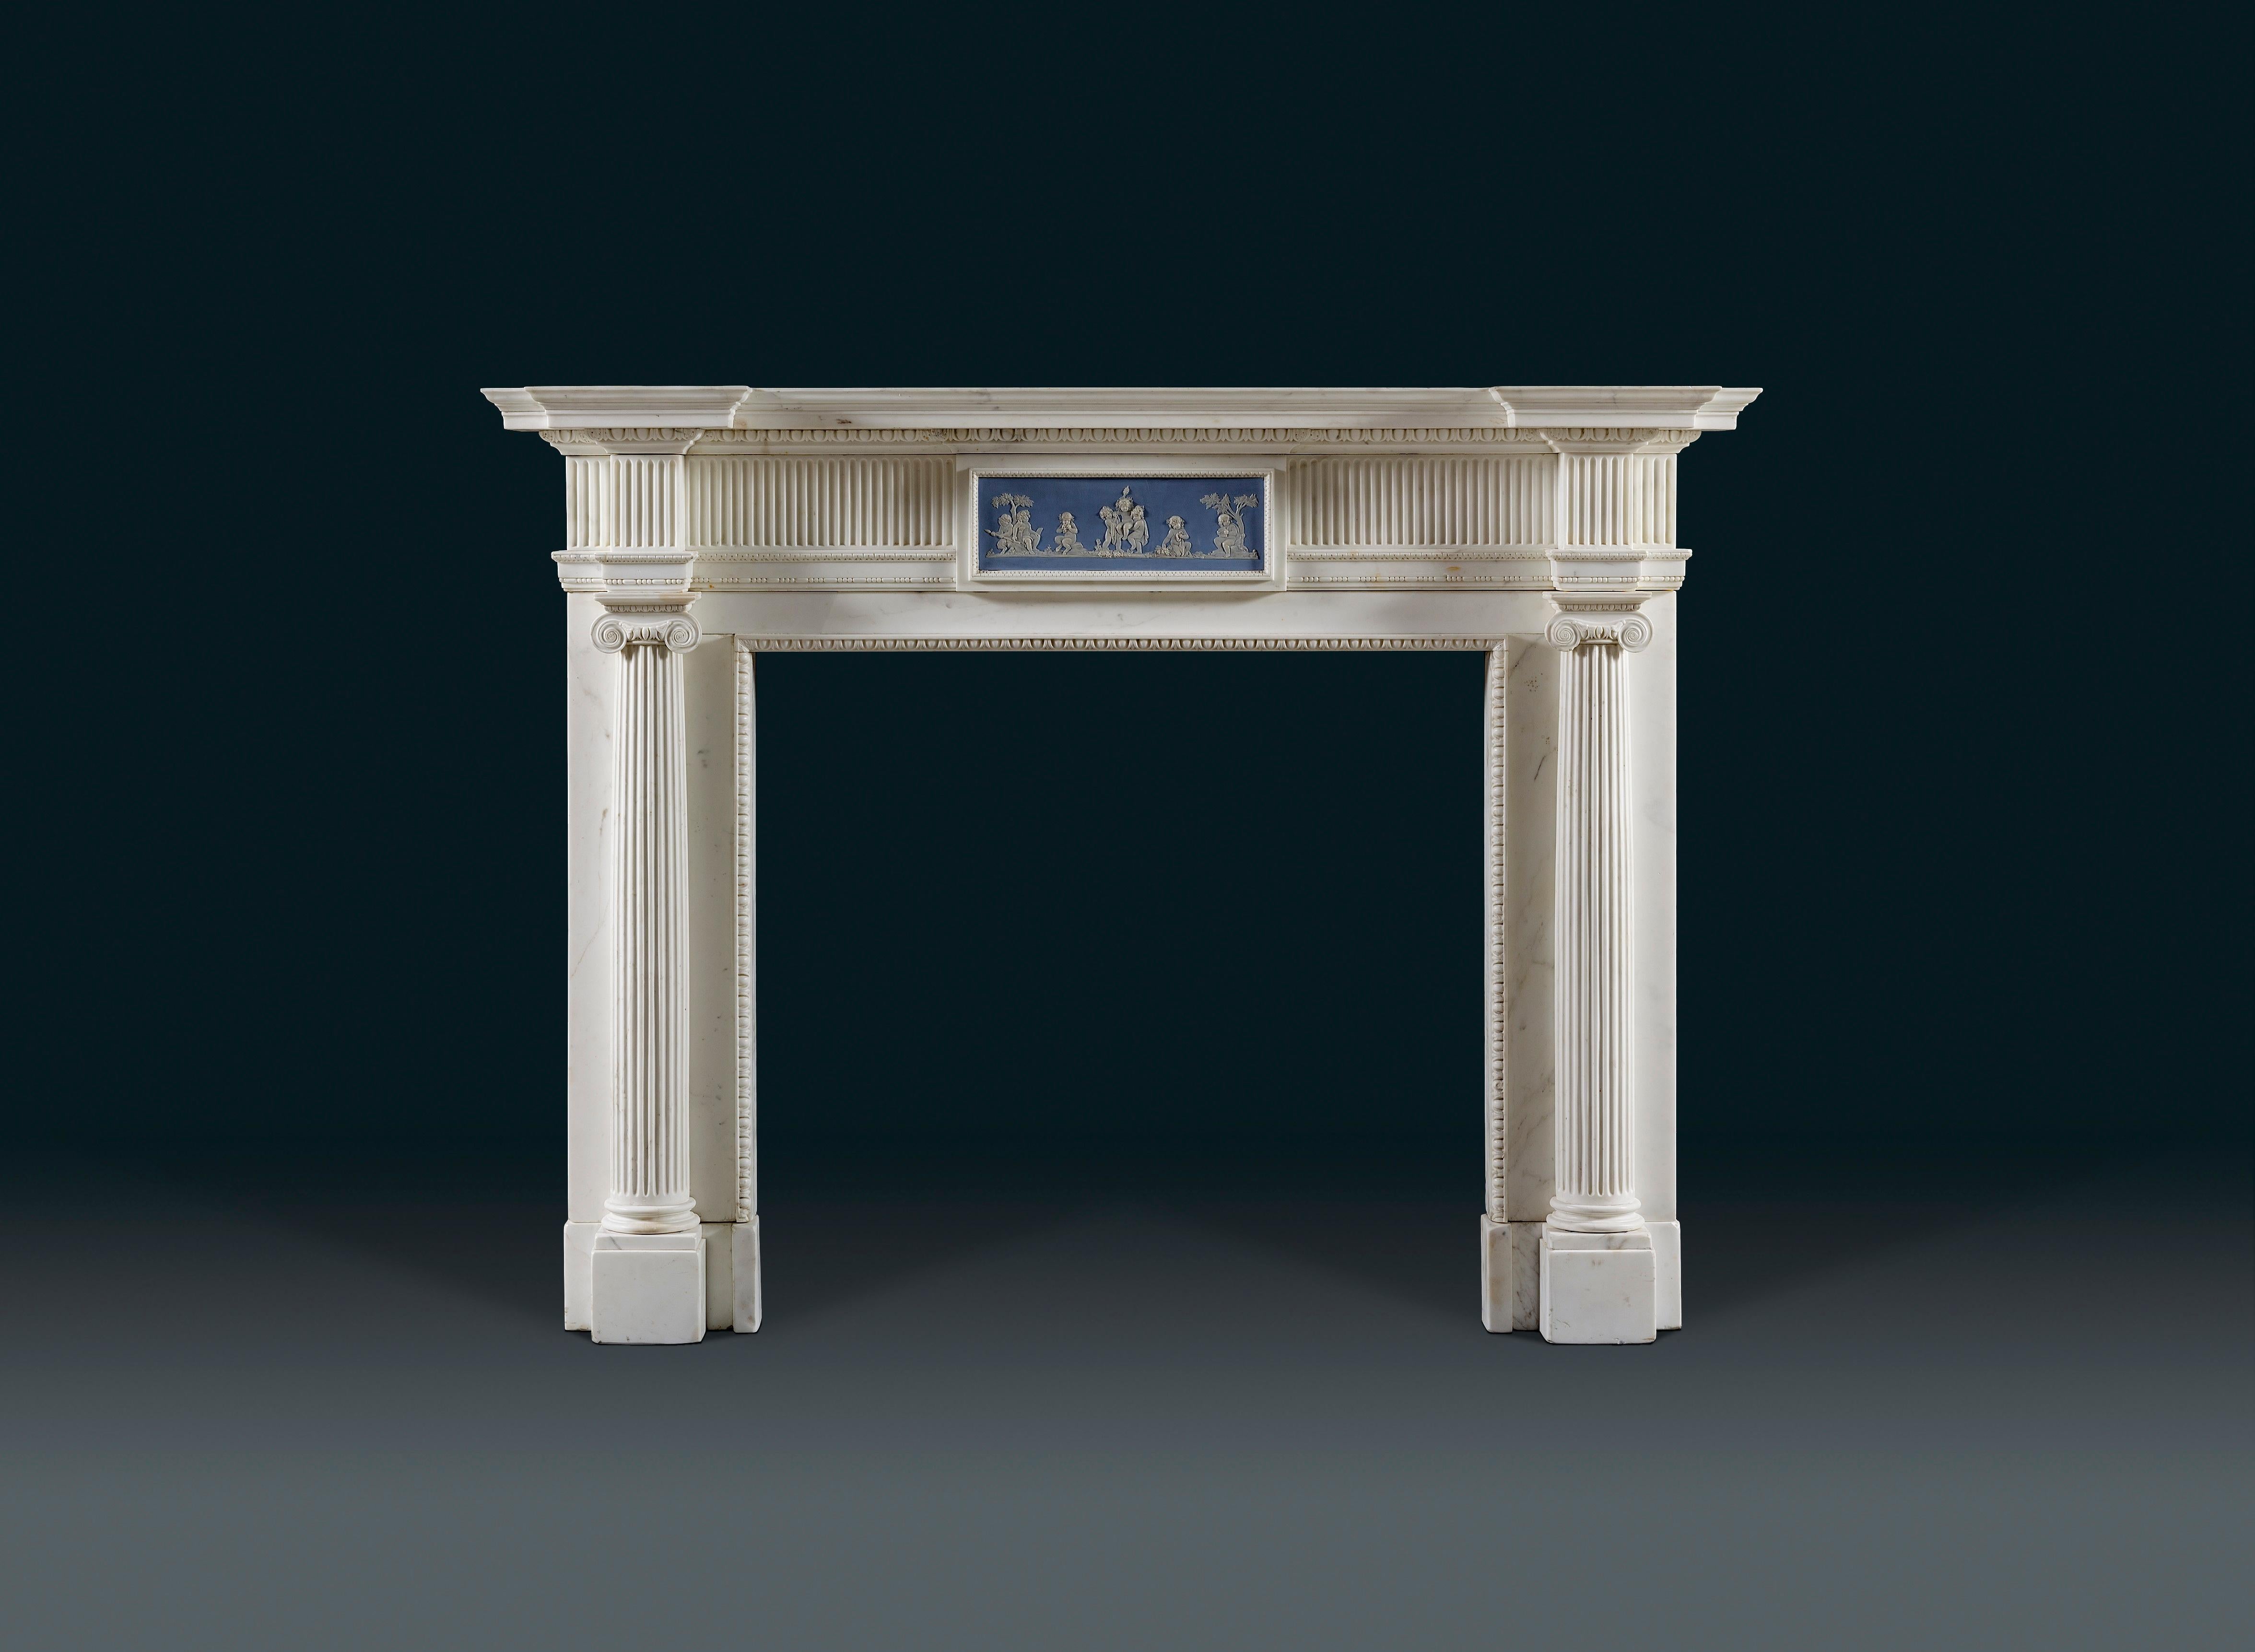 A late 18th century, early 19th century neoclassical chimneypiece in white statuary marble, centred with a Wedgwood ' Bacchanal' tablet, with 3/4 round fluted Ionic columns fronting the jambs. The Wedgwood tablet depicts a central group of three